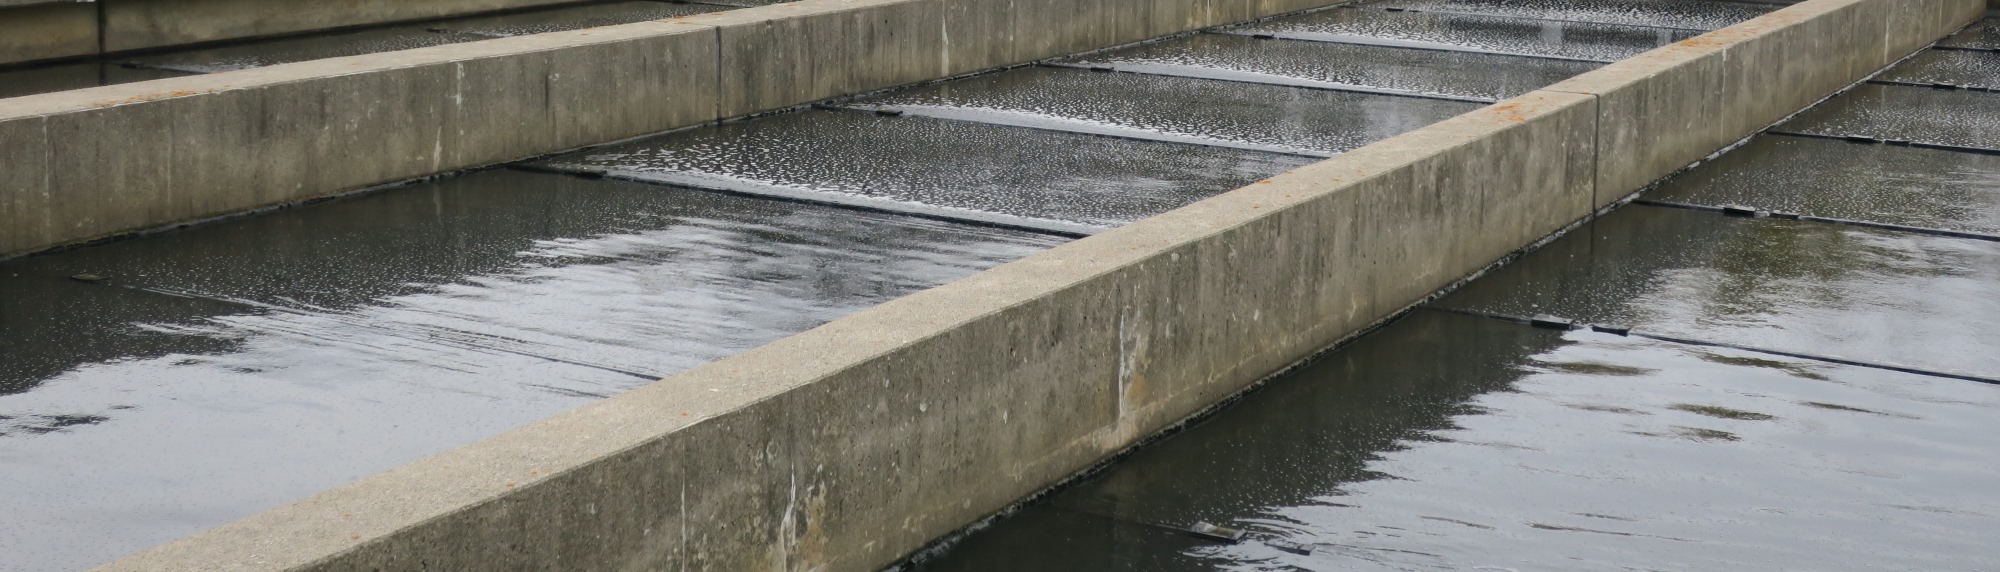 Wastewater reports